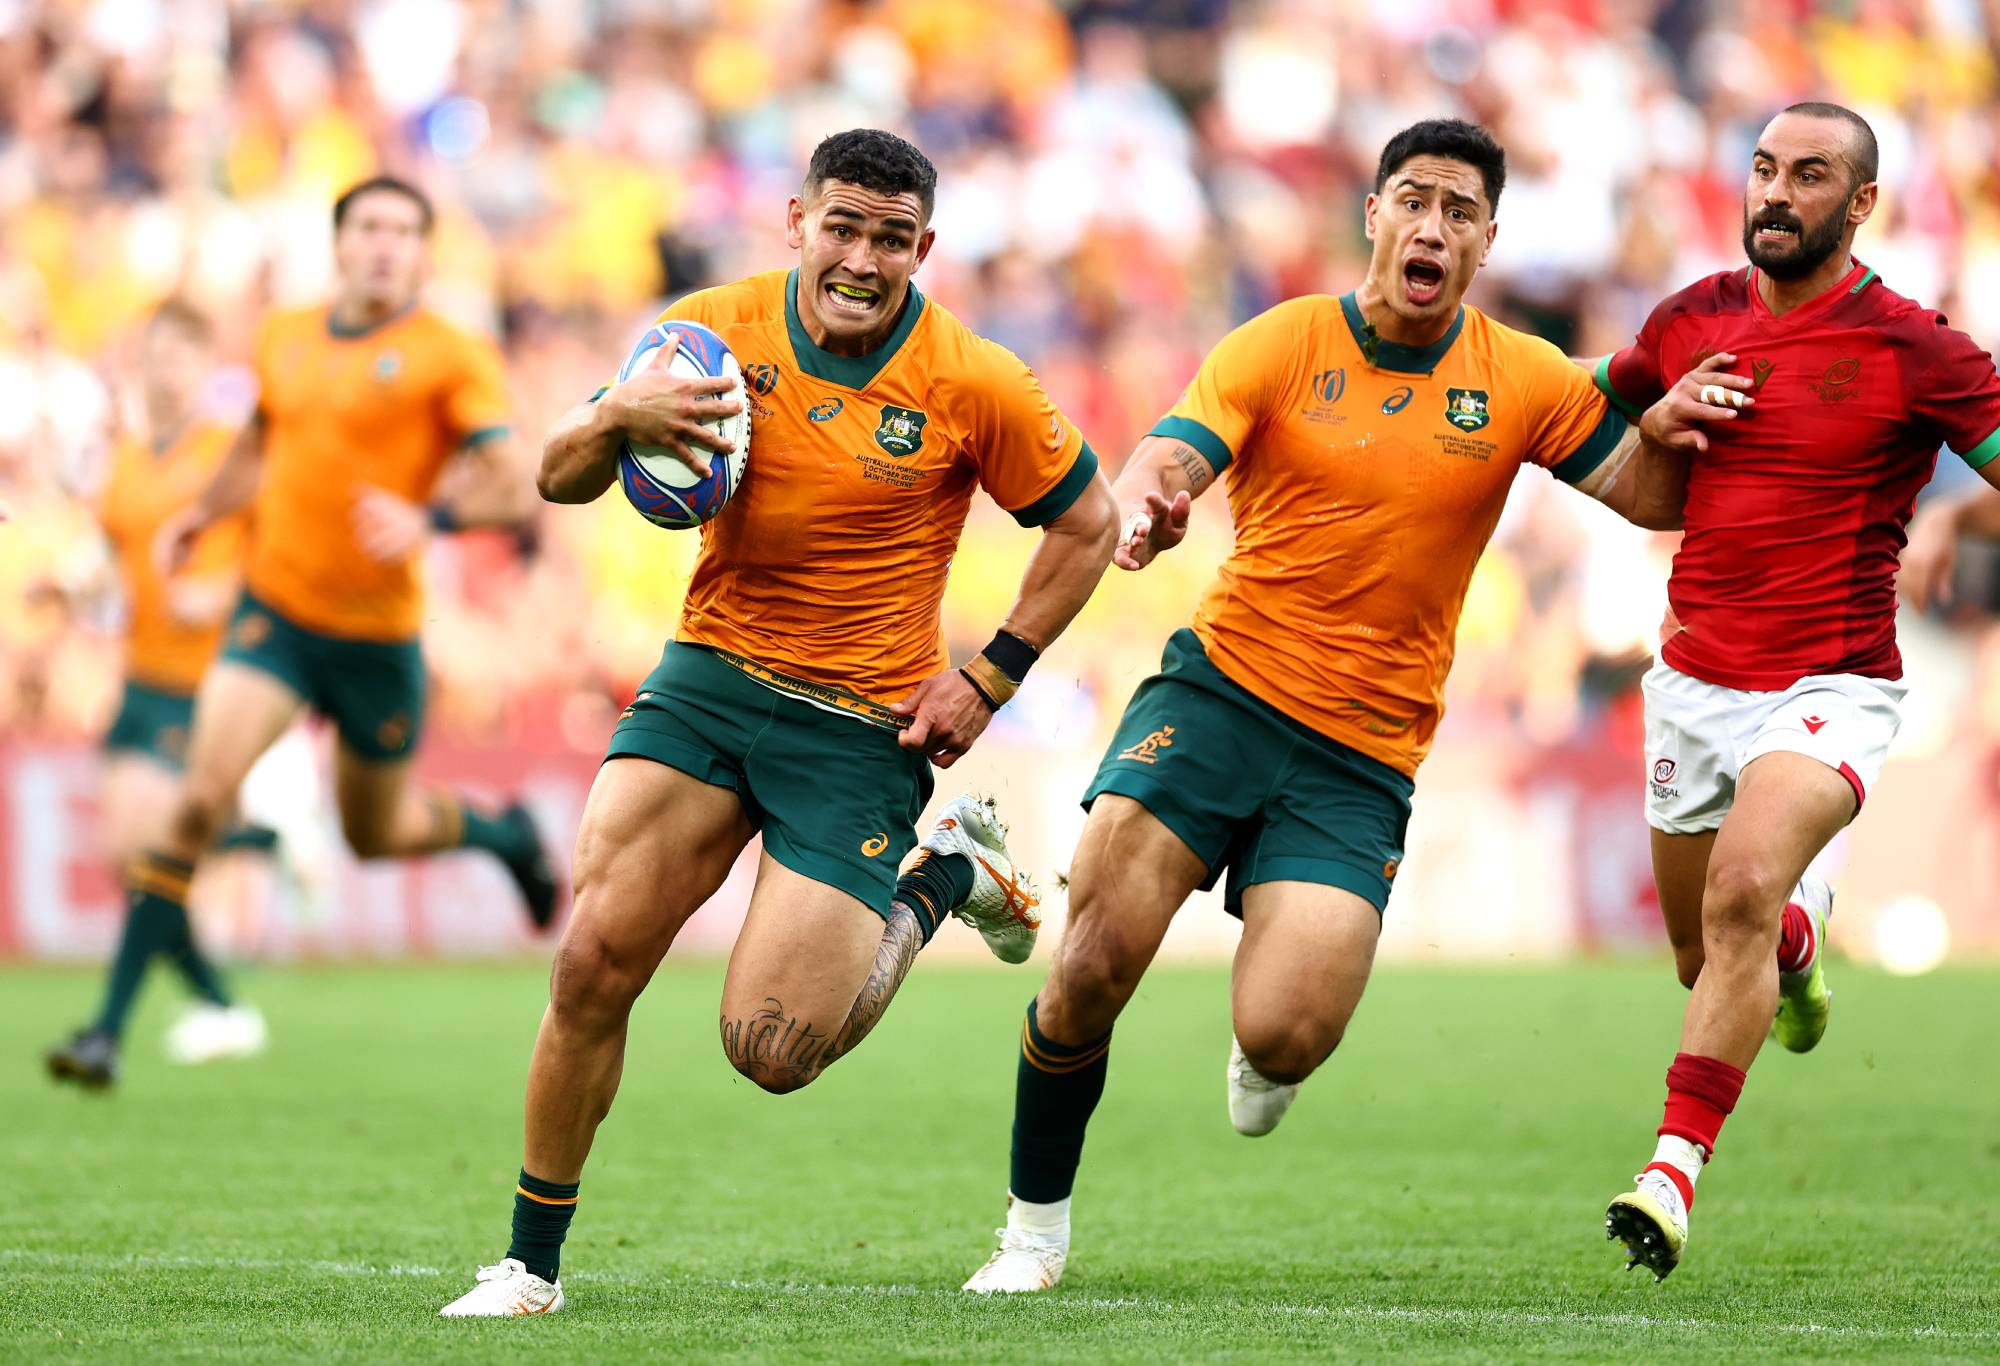 Wallabies’ World Cup hopes still alive after wild win over Portugal – but it will take a miracle to avoid historic first